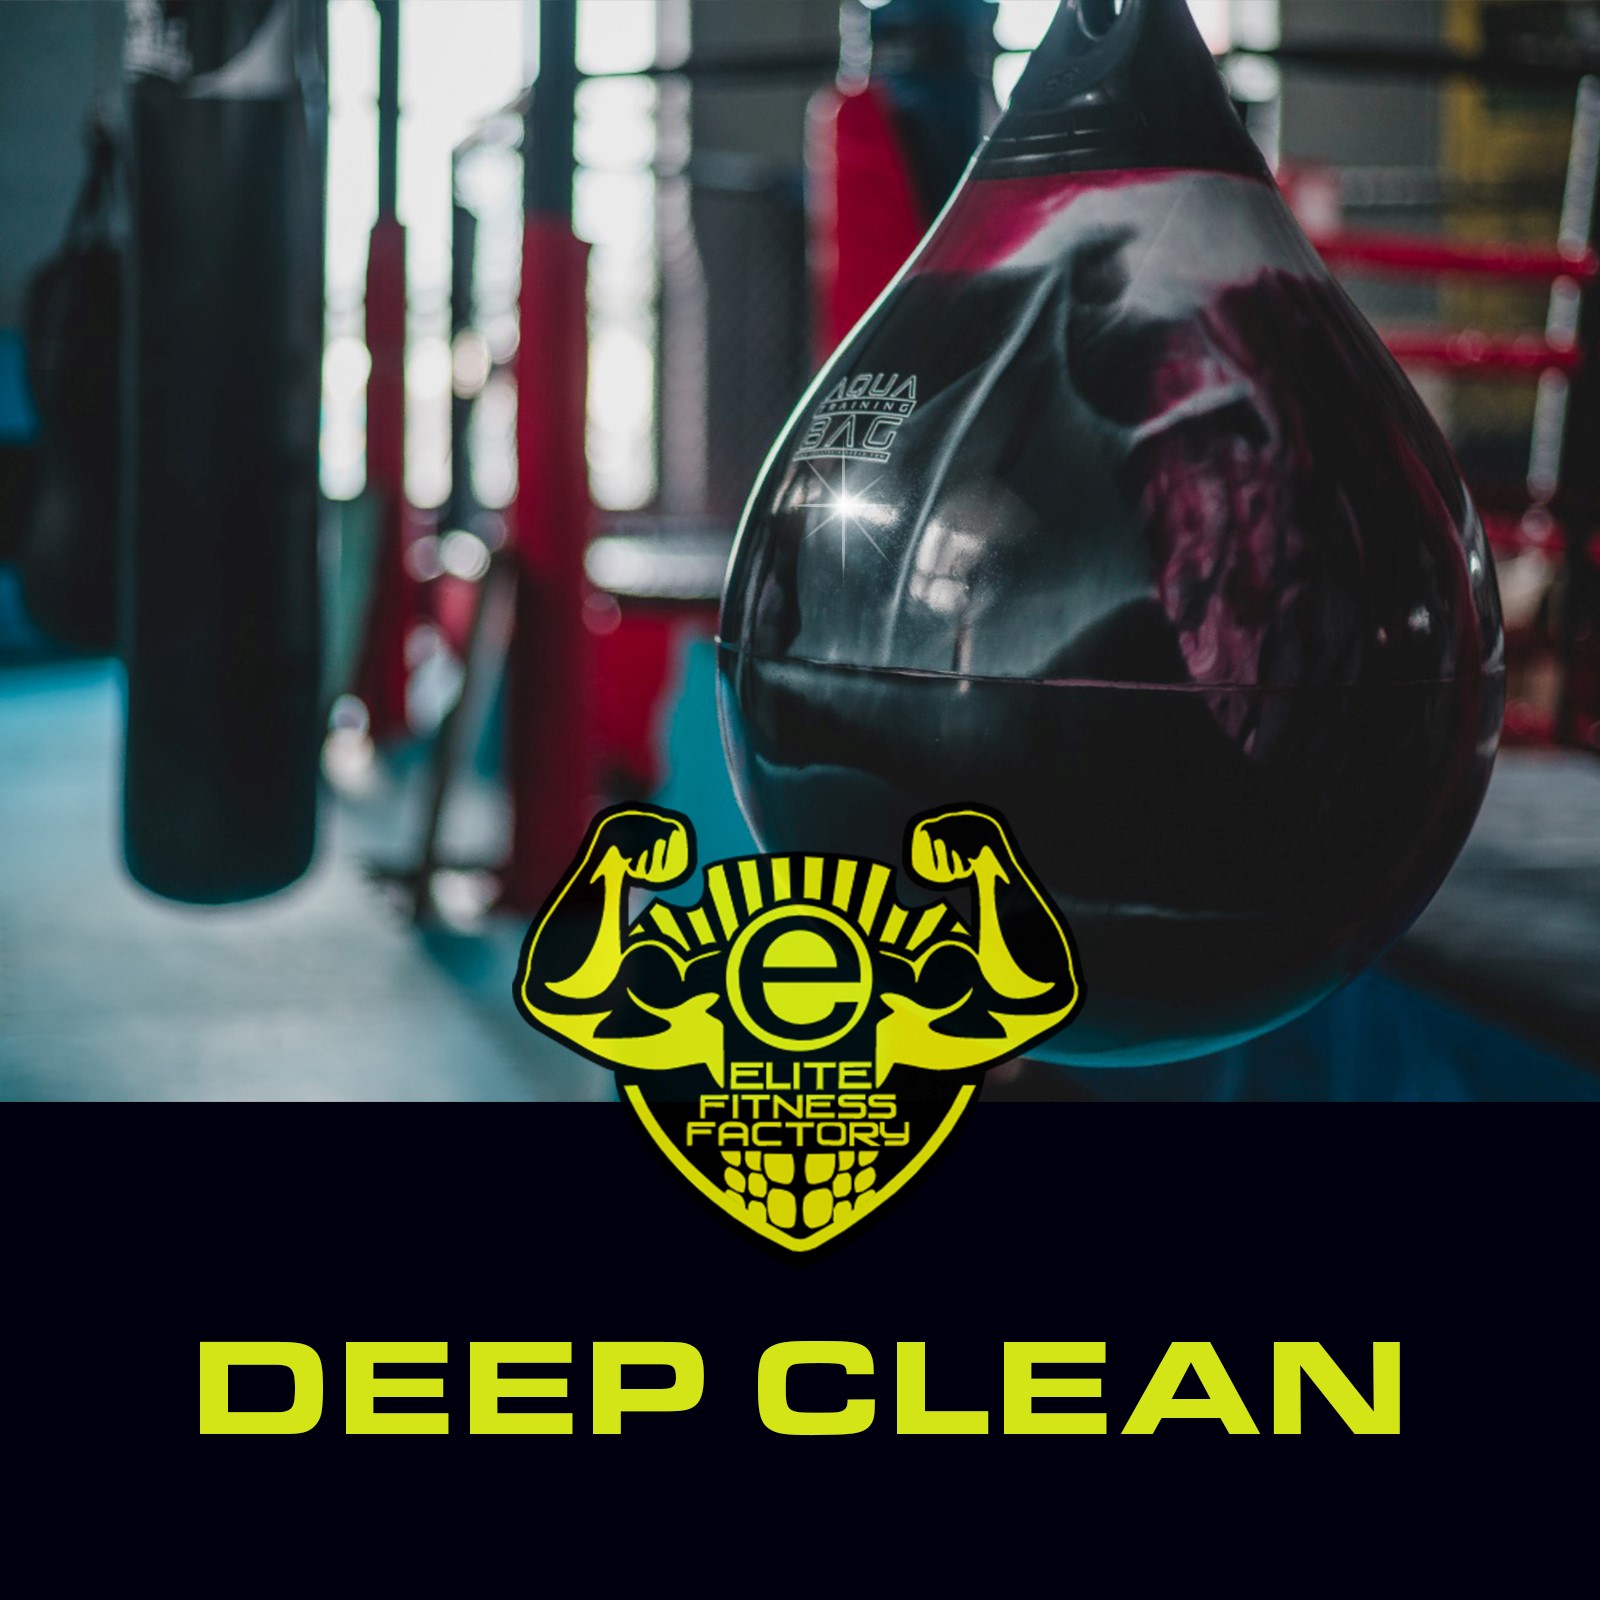 Deep cleaning at one of the best gym’s in the North West, Elite Fitness Factory.